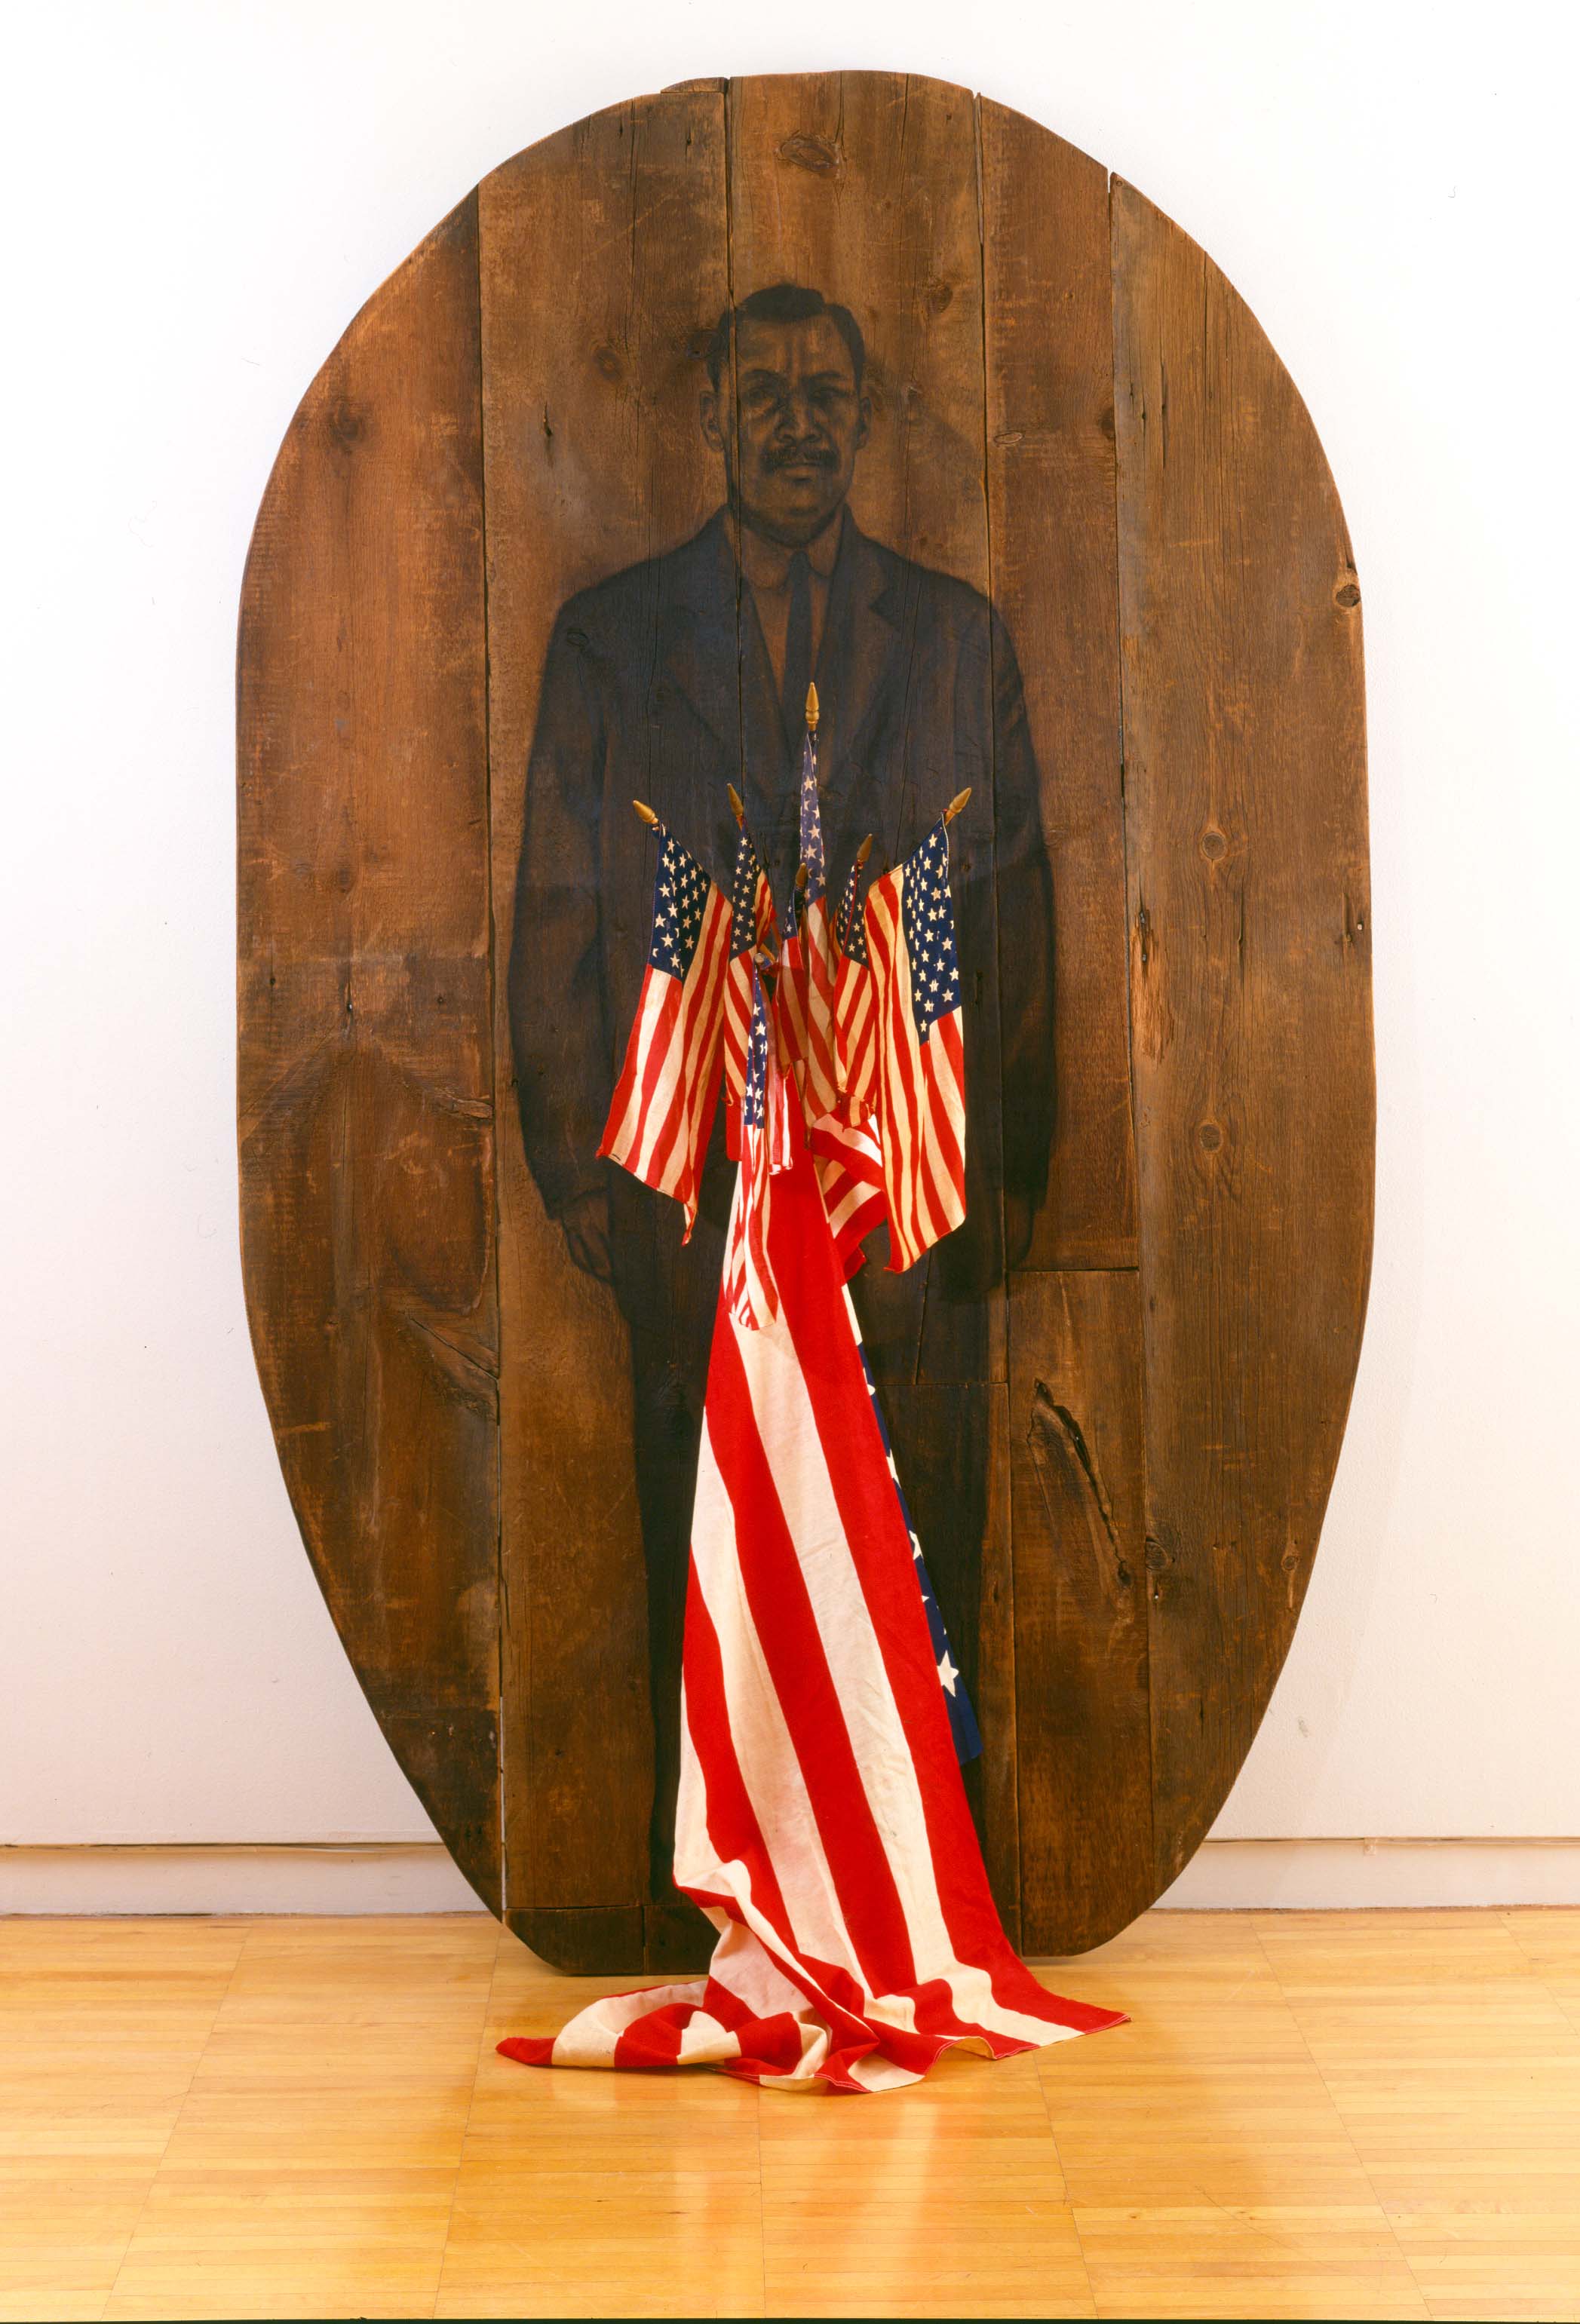 Large oval painting on wood planks of a Black man in a suit. American flags protrude from the front of the painting.